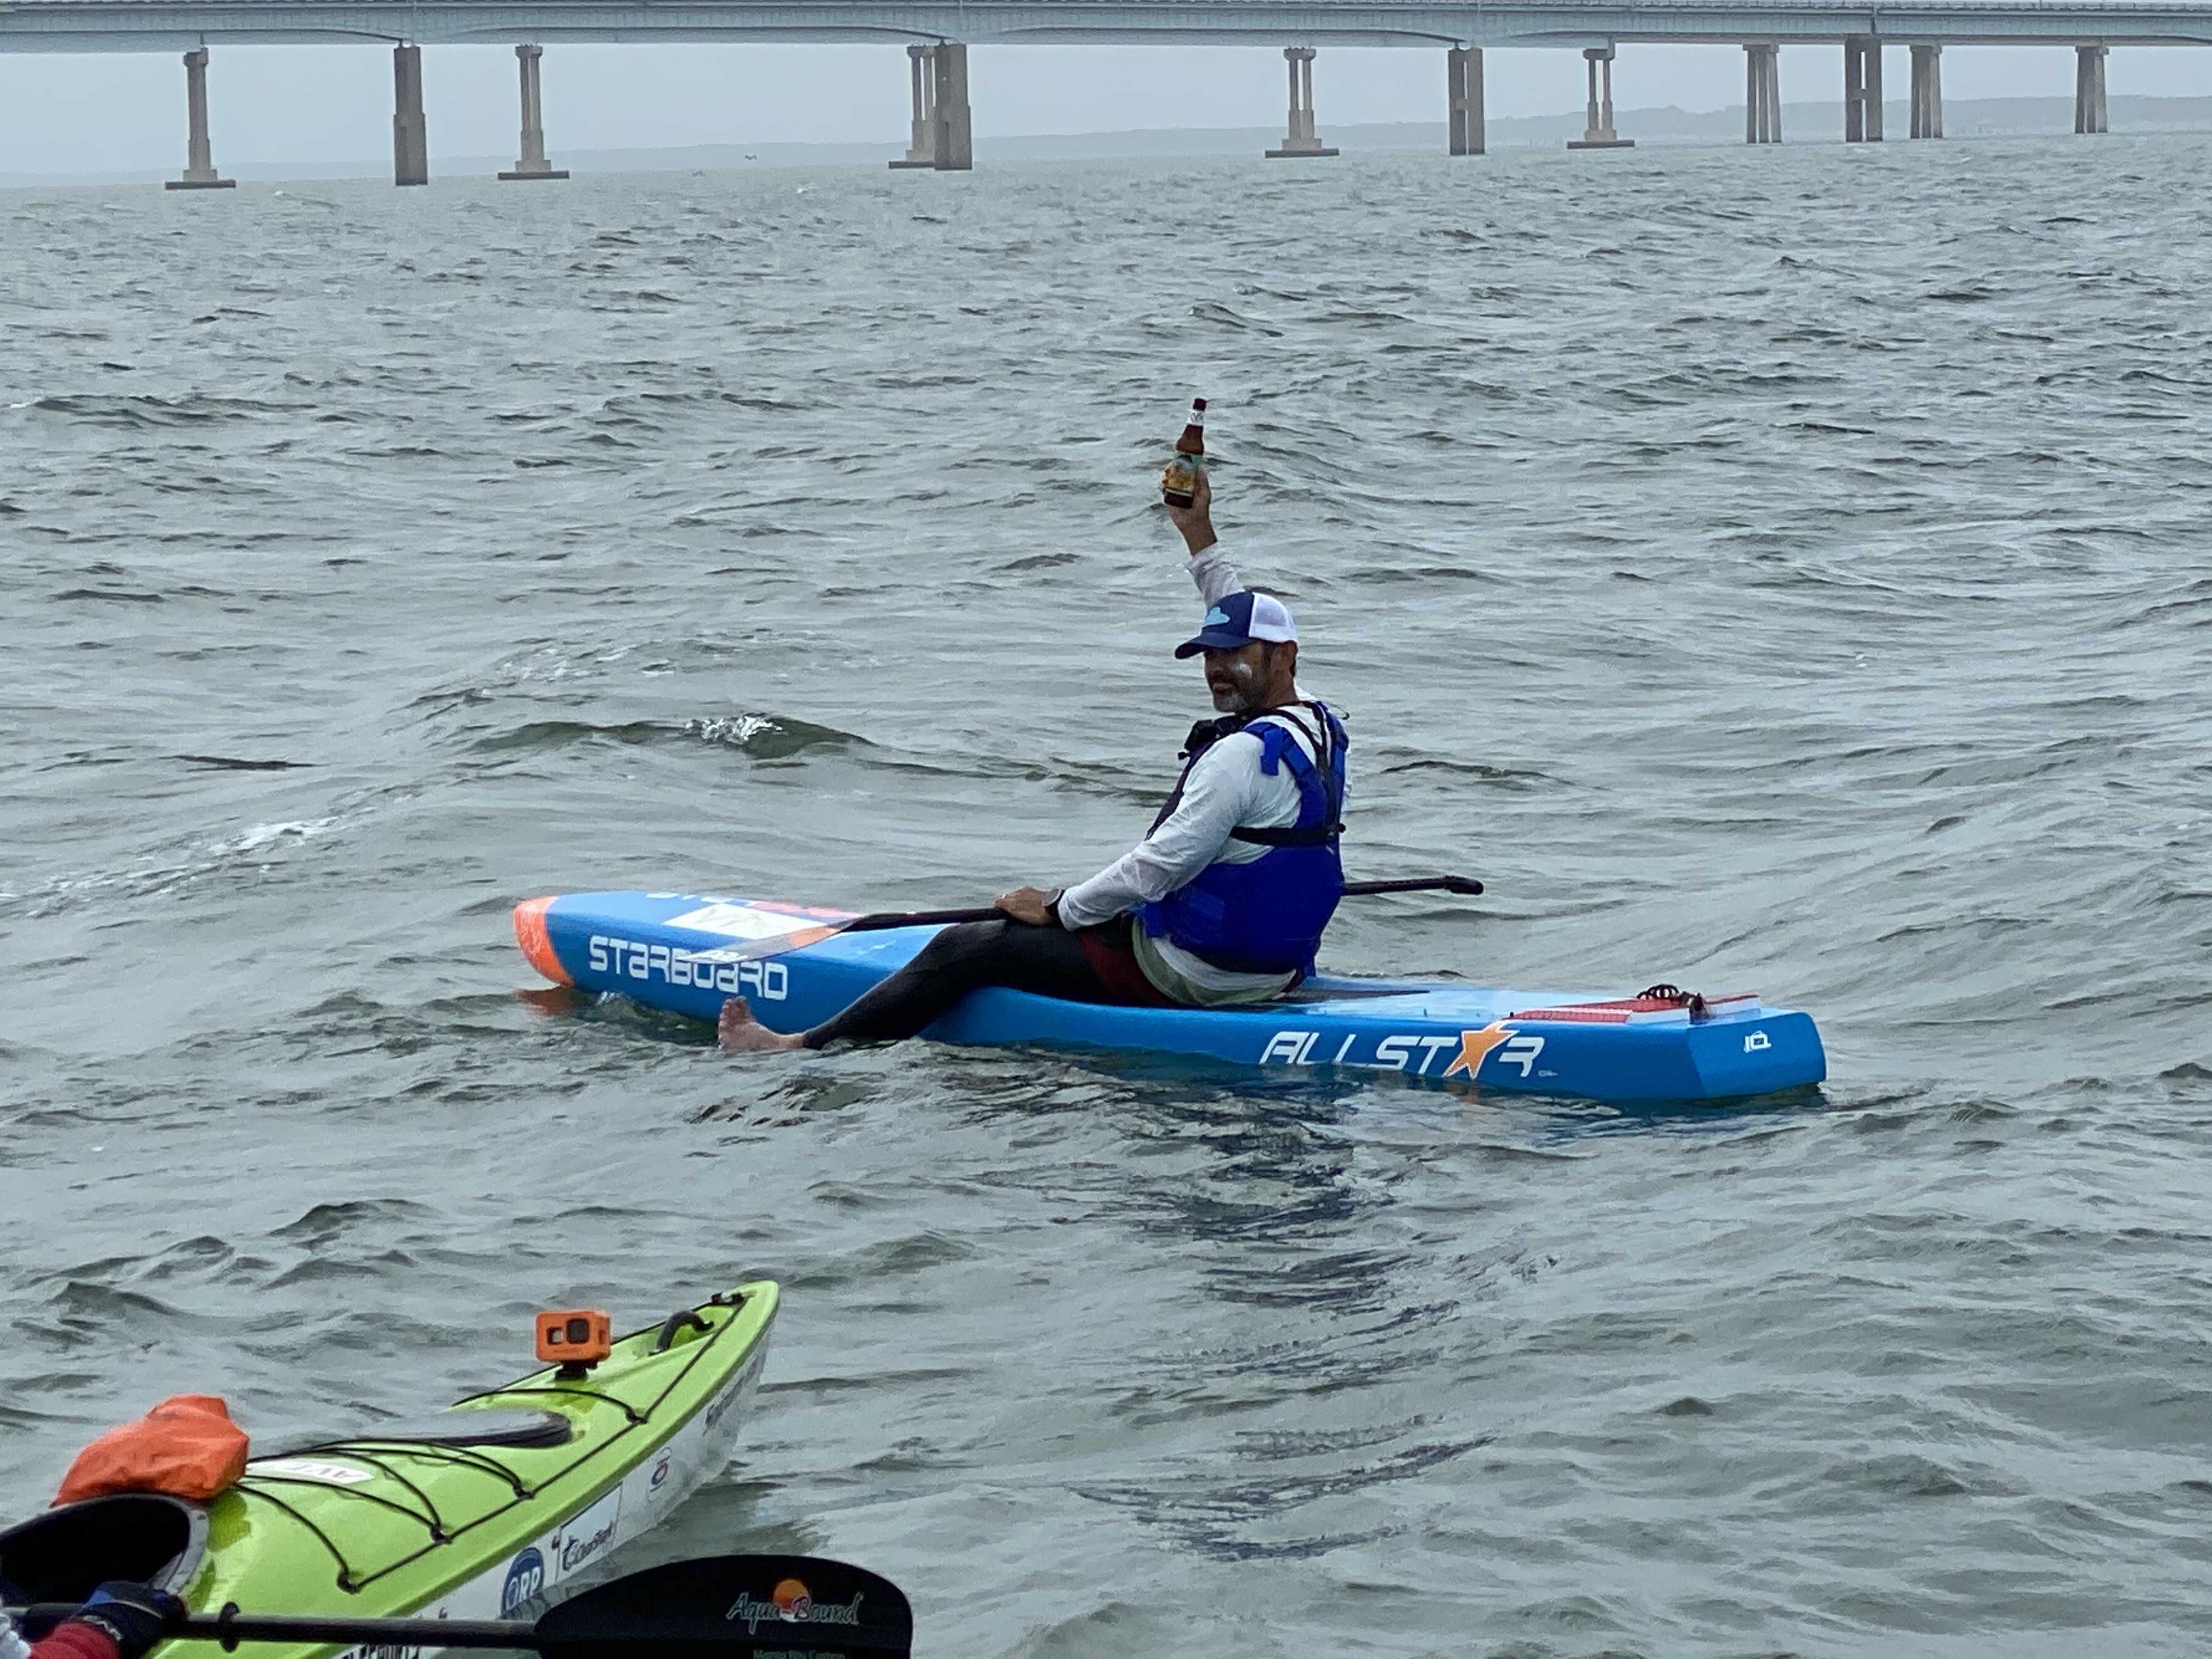 Chris Hopkinson successfully paddles the entire length of the Chesapeake Bay